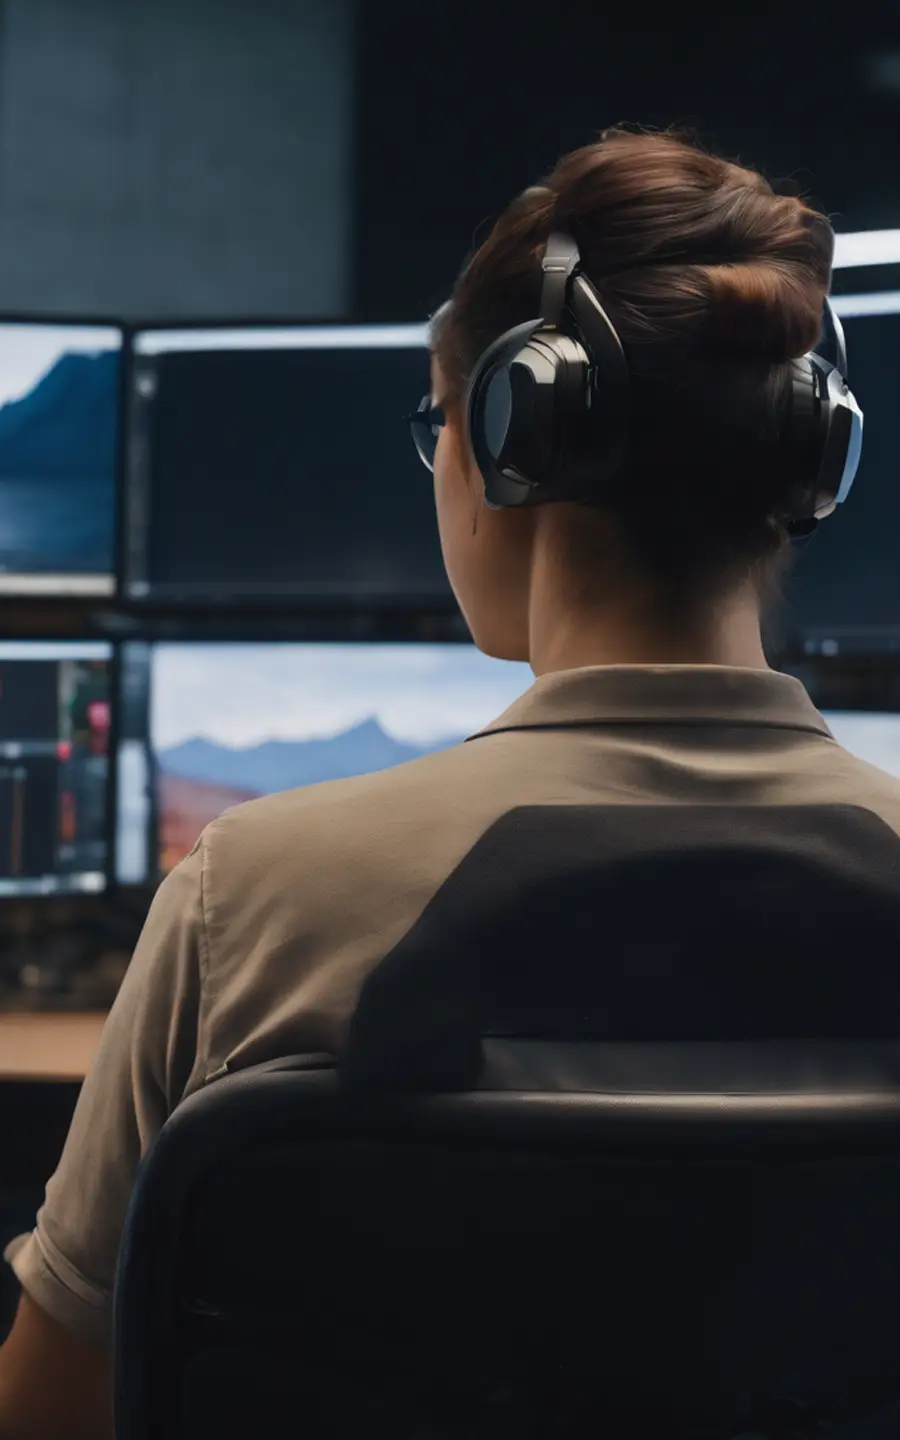 A professional monitoring multiple screens while wearing headphones in a modern control room setting